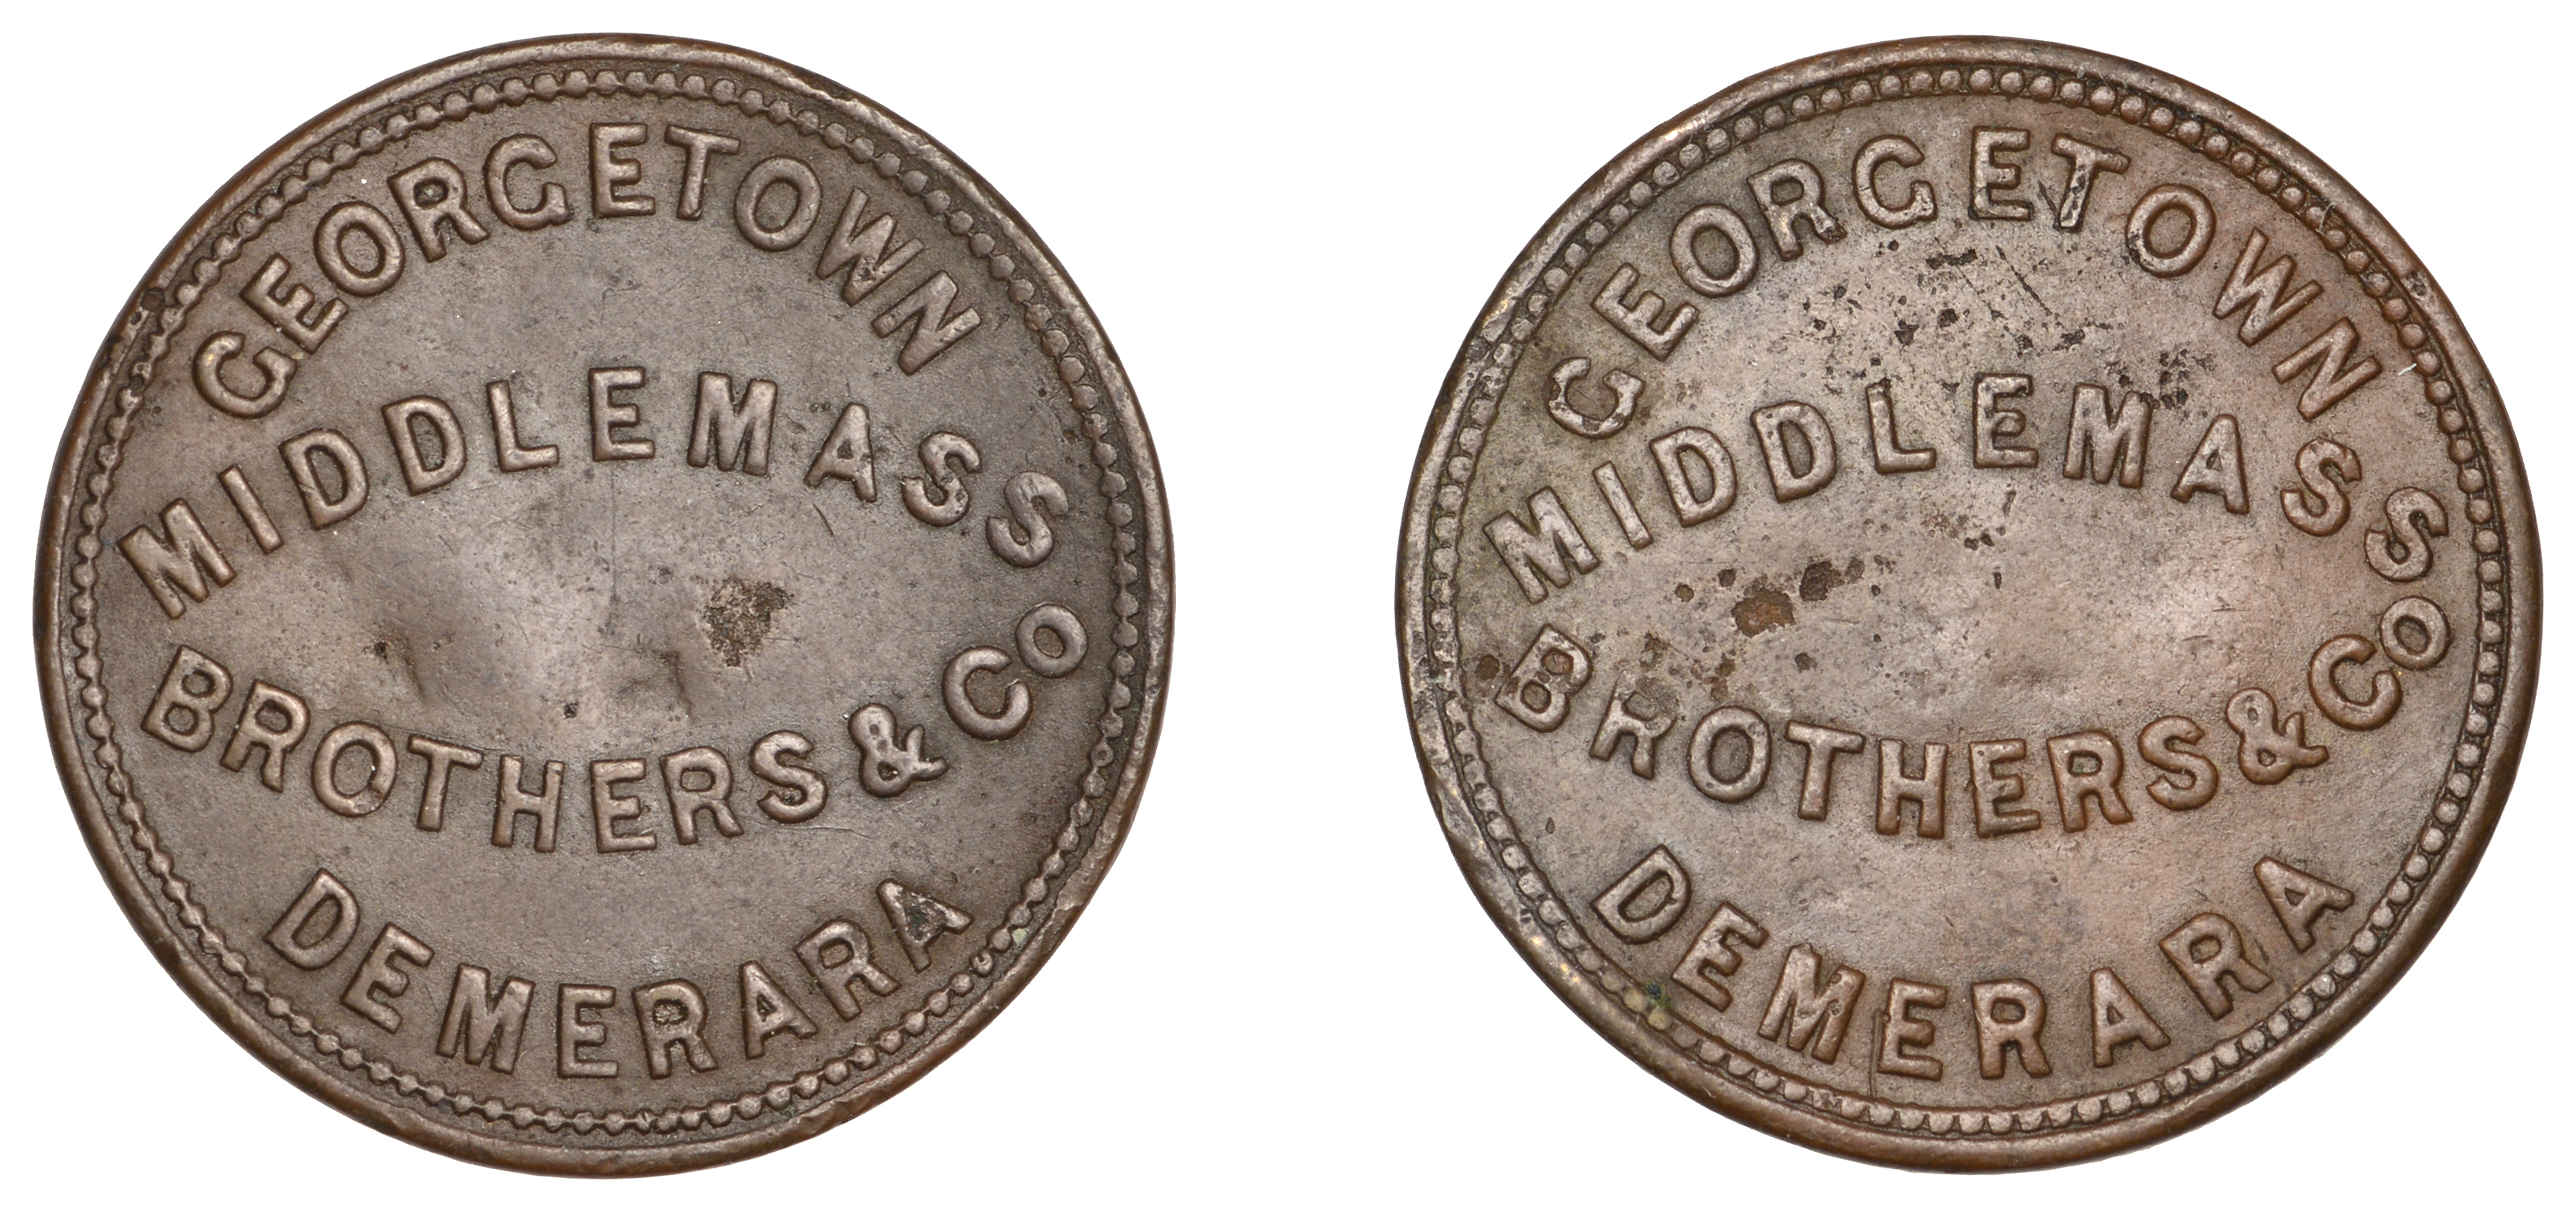 British Guiana, GEORGETOWN, Middlemass Brothers & Co., advertising token, copper, 24mm (Lyal...